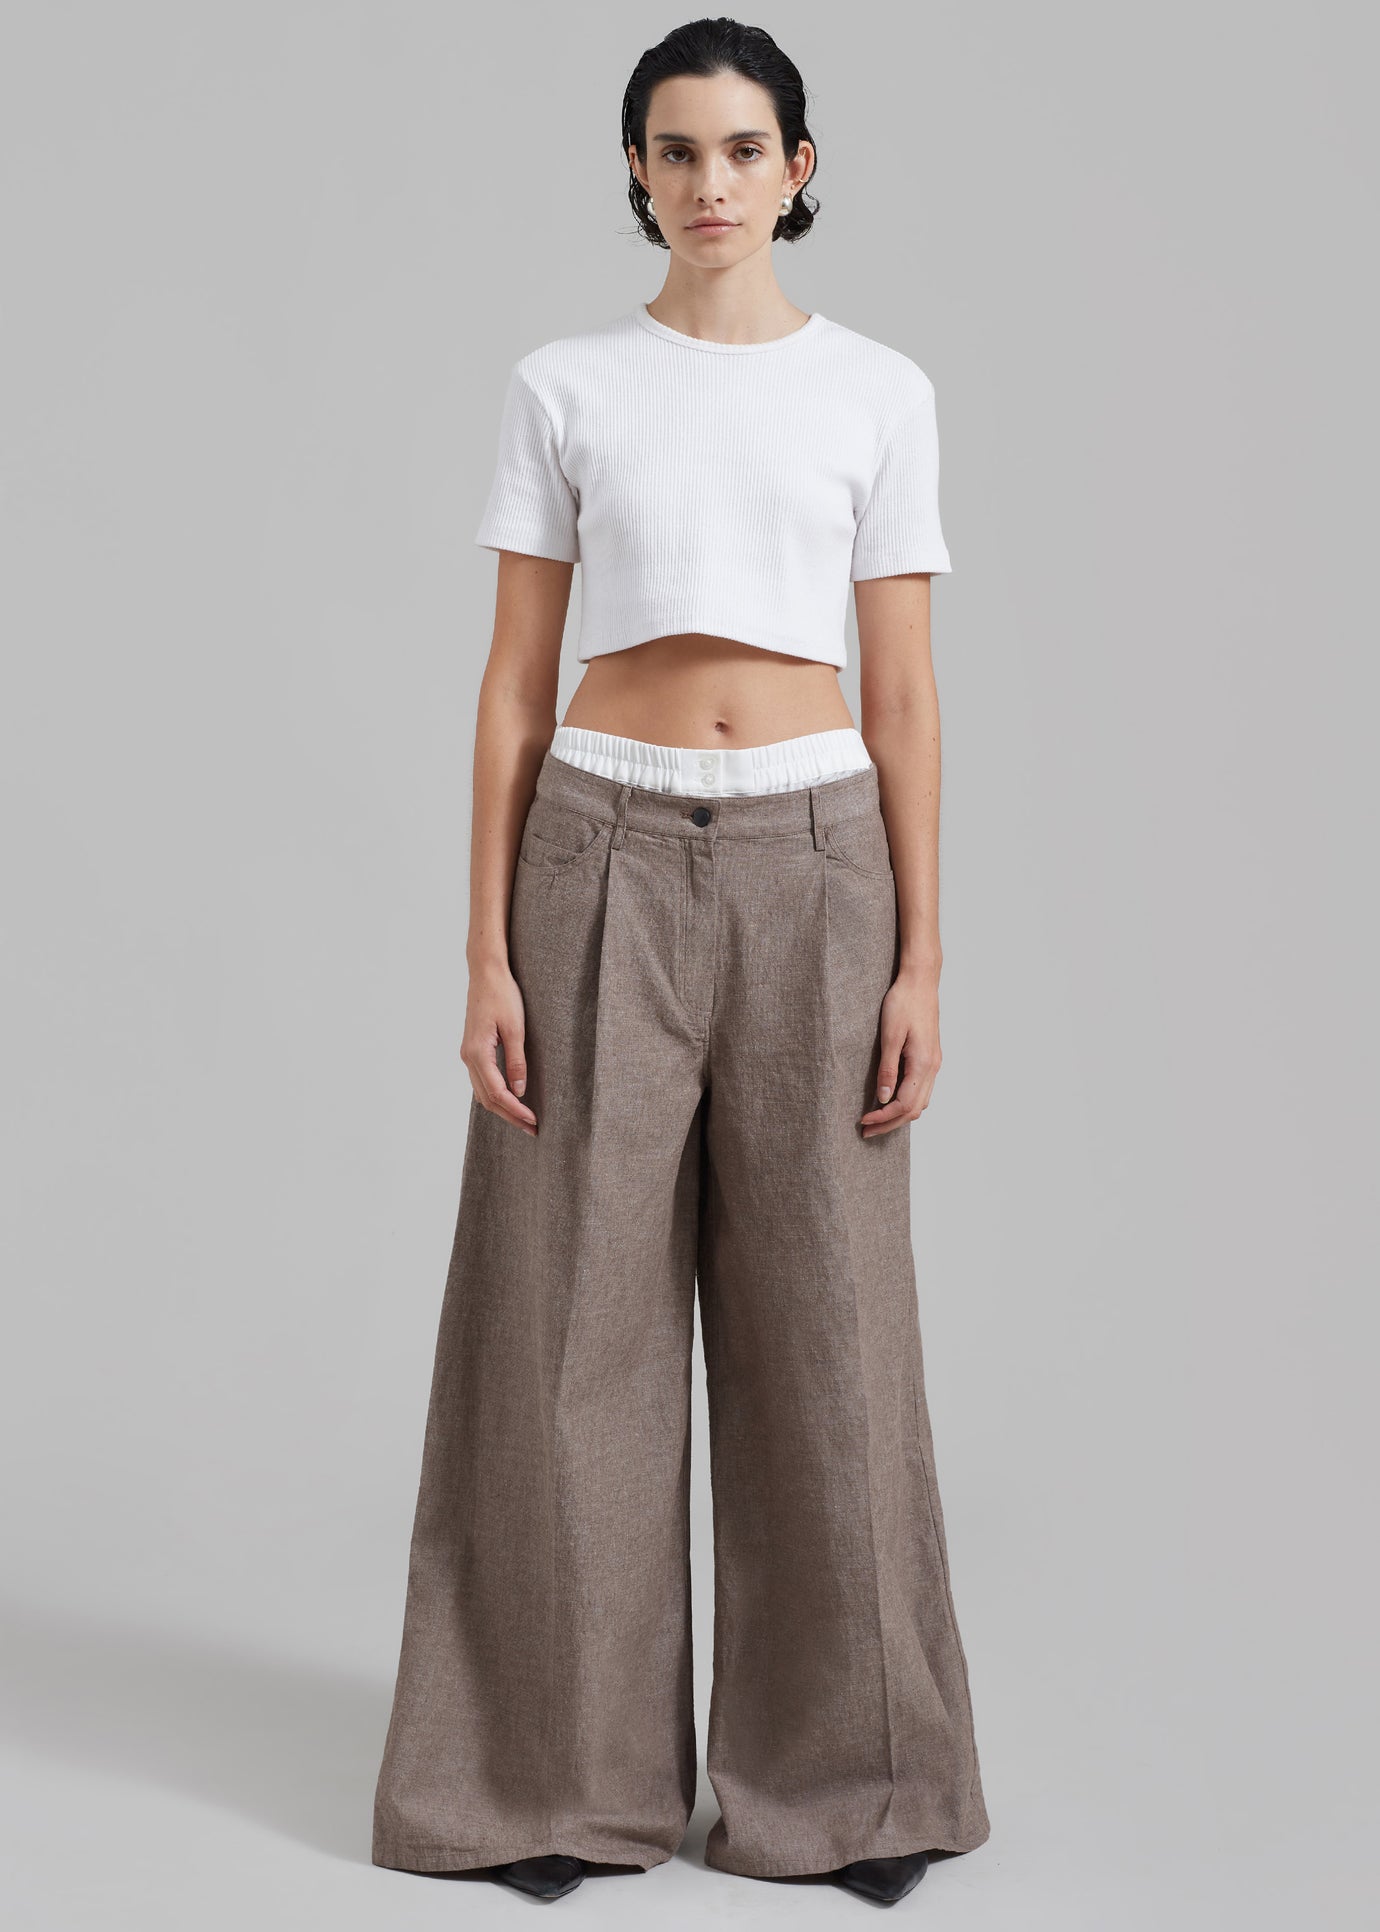 REMAIN Textured Wide Pants - Deep Taupe - 1